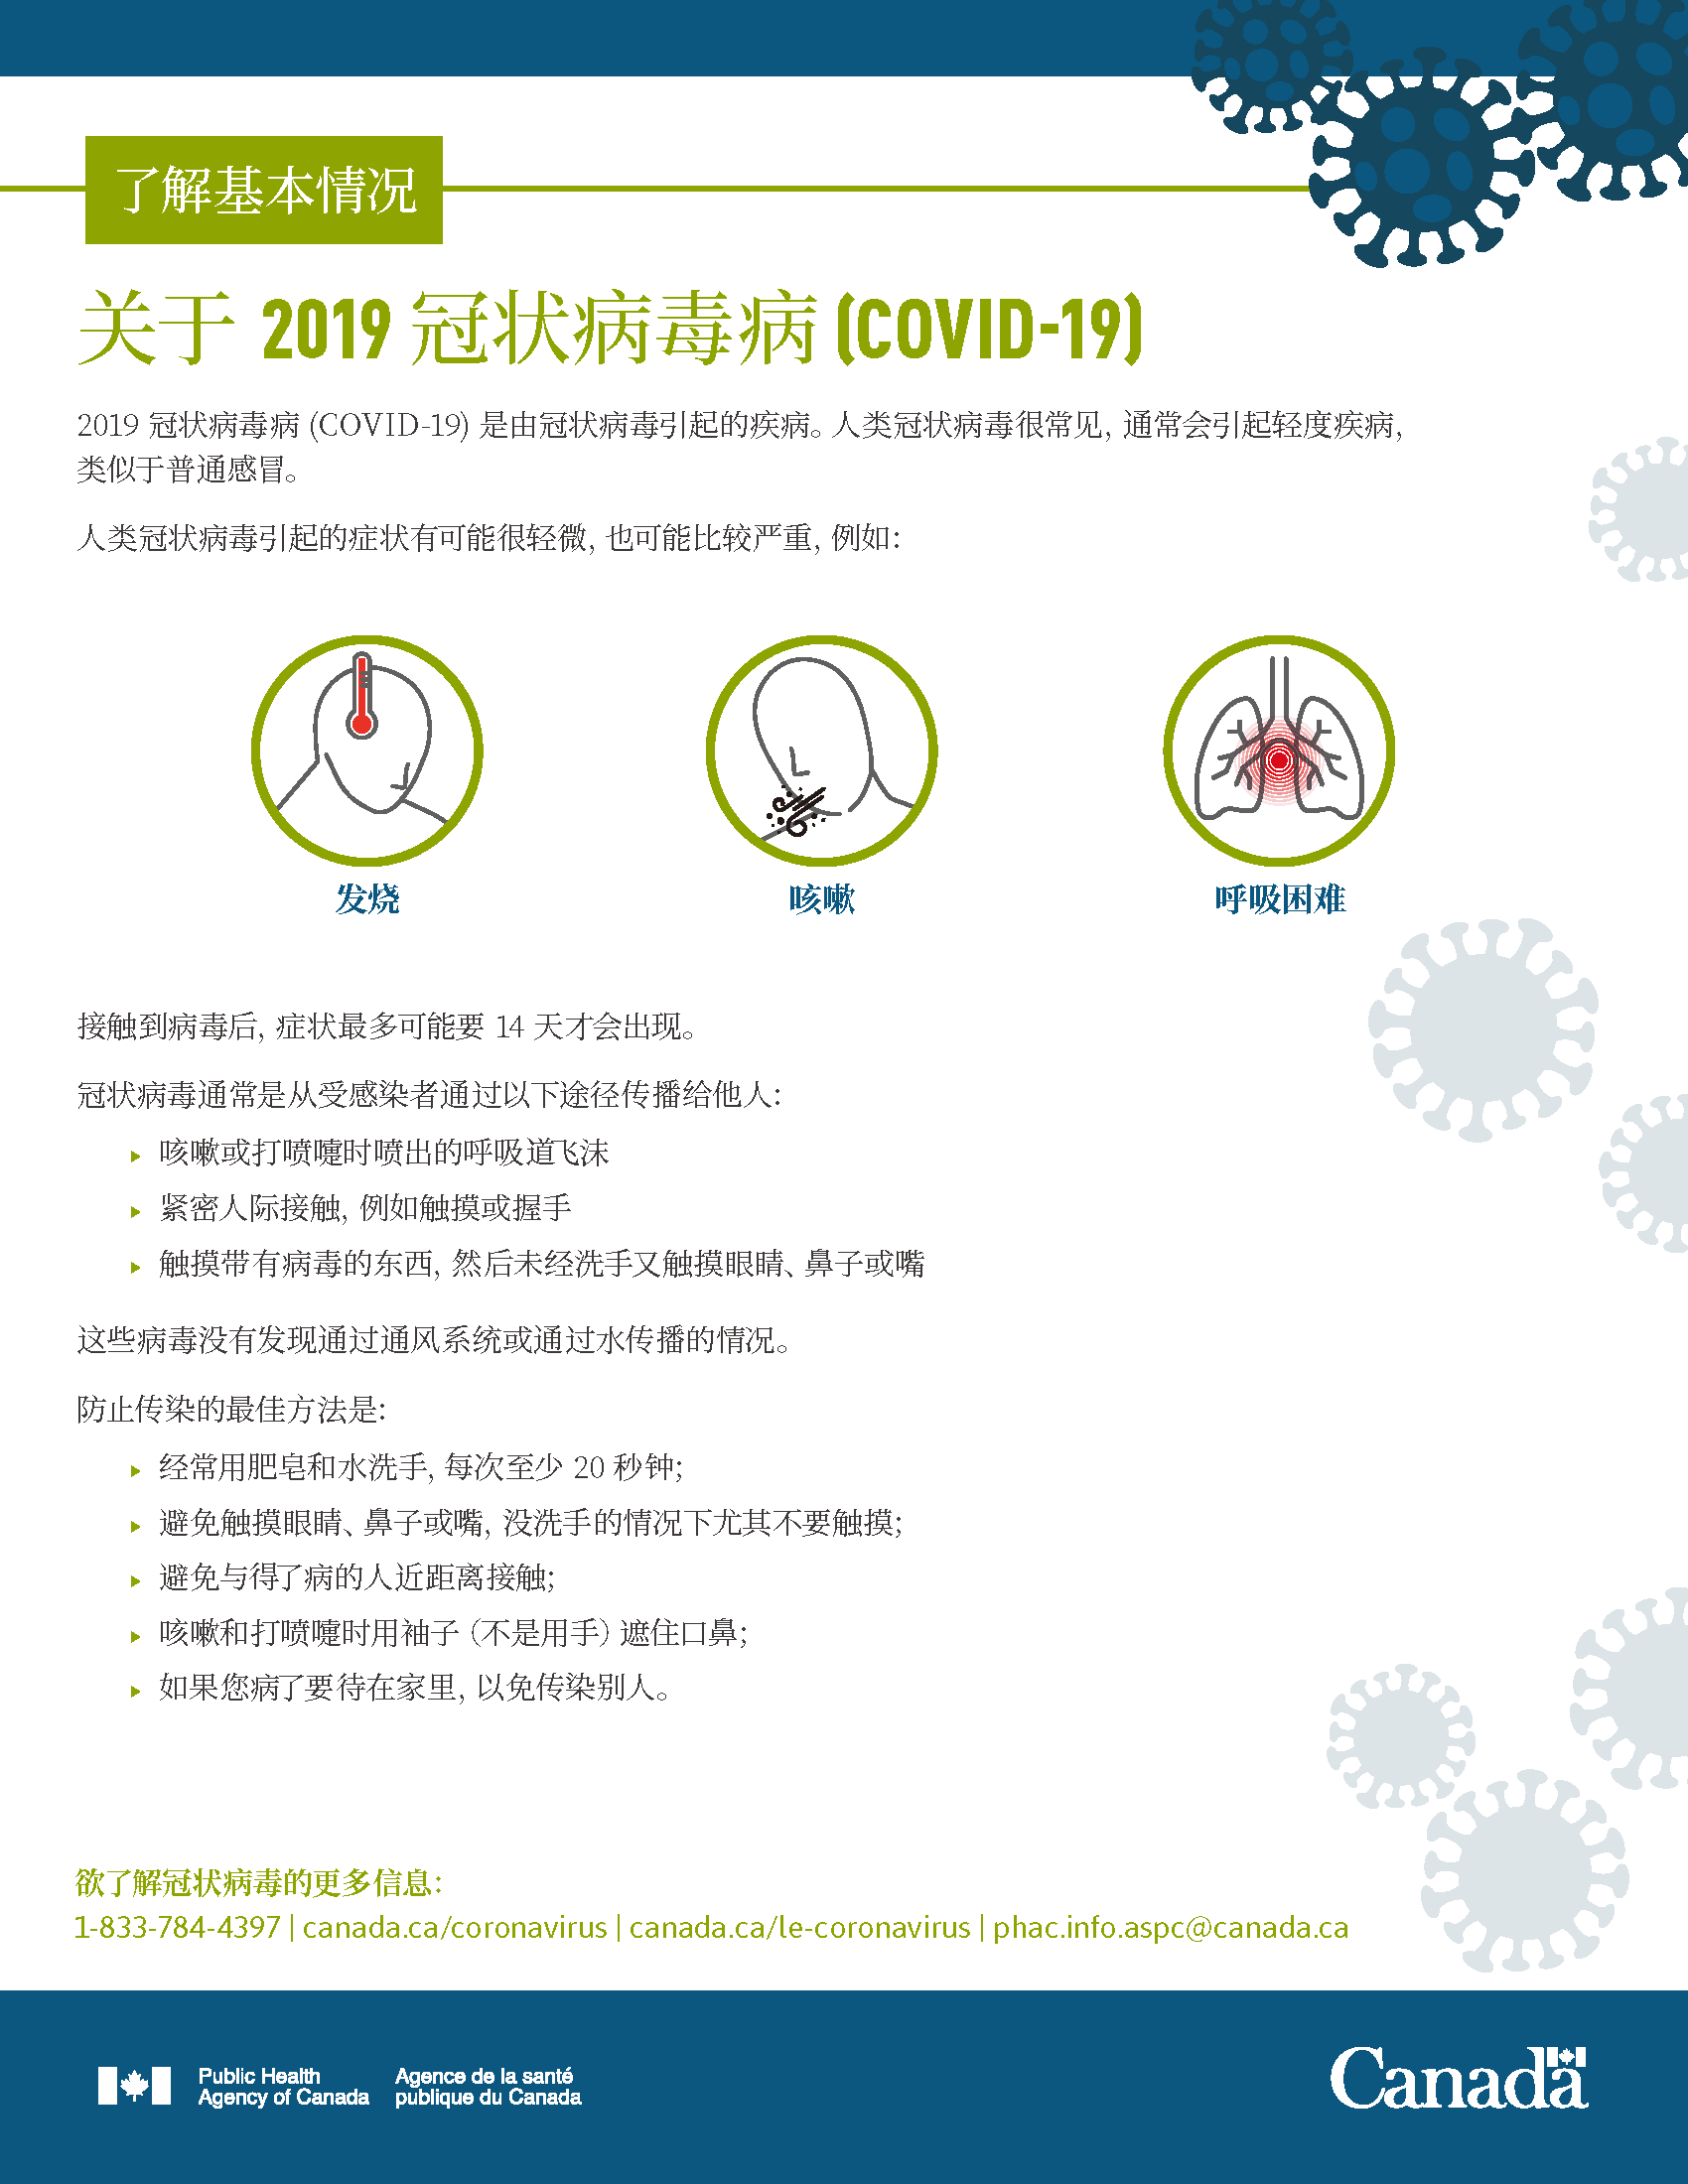 20200313-know-facts-about-coronavirus-disease-covid-19-chinese.png